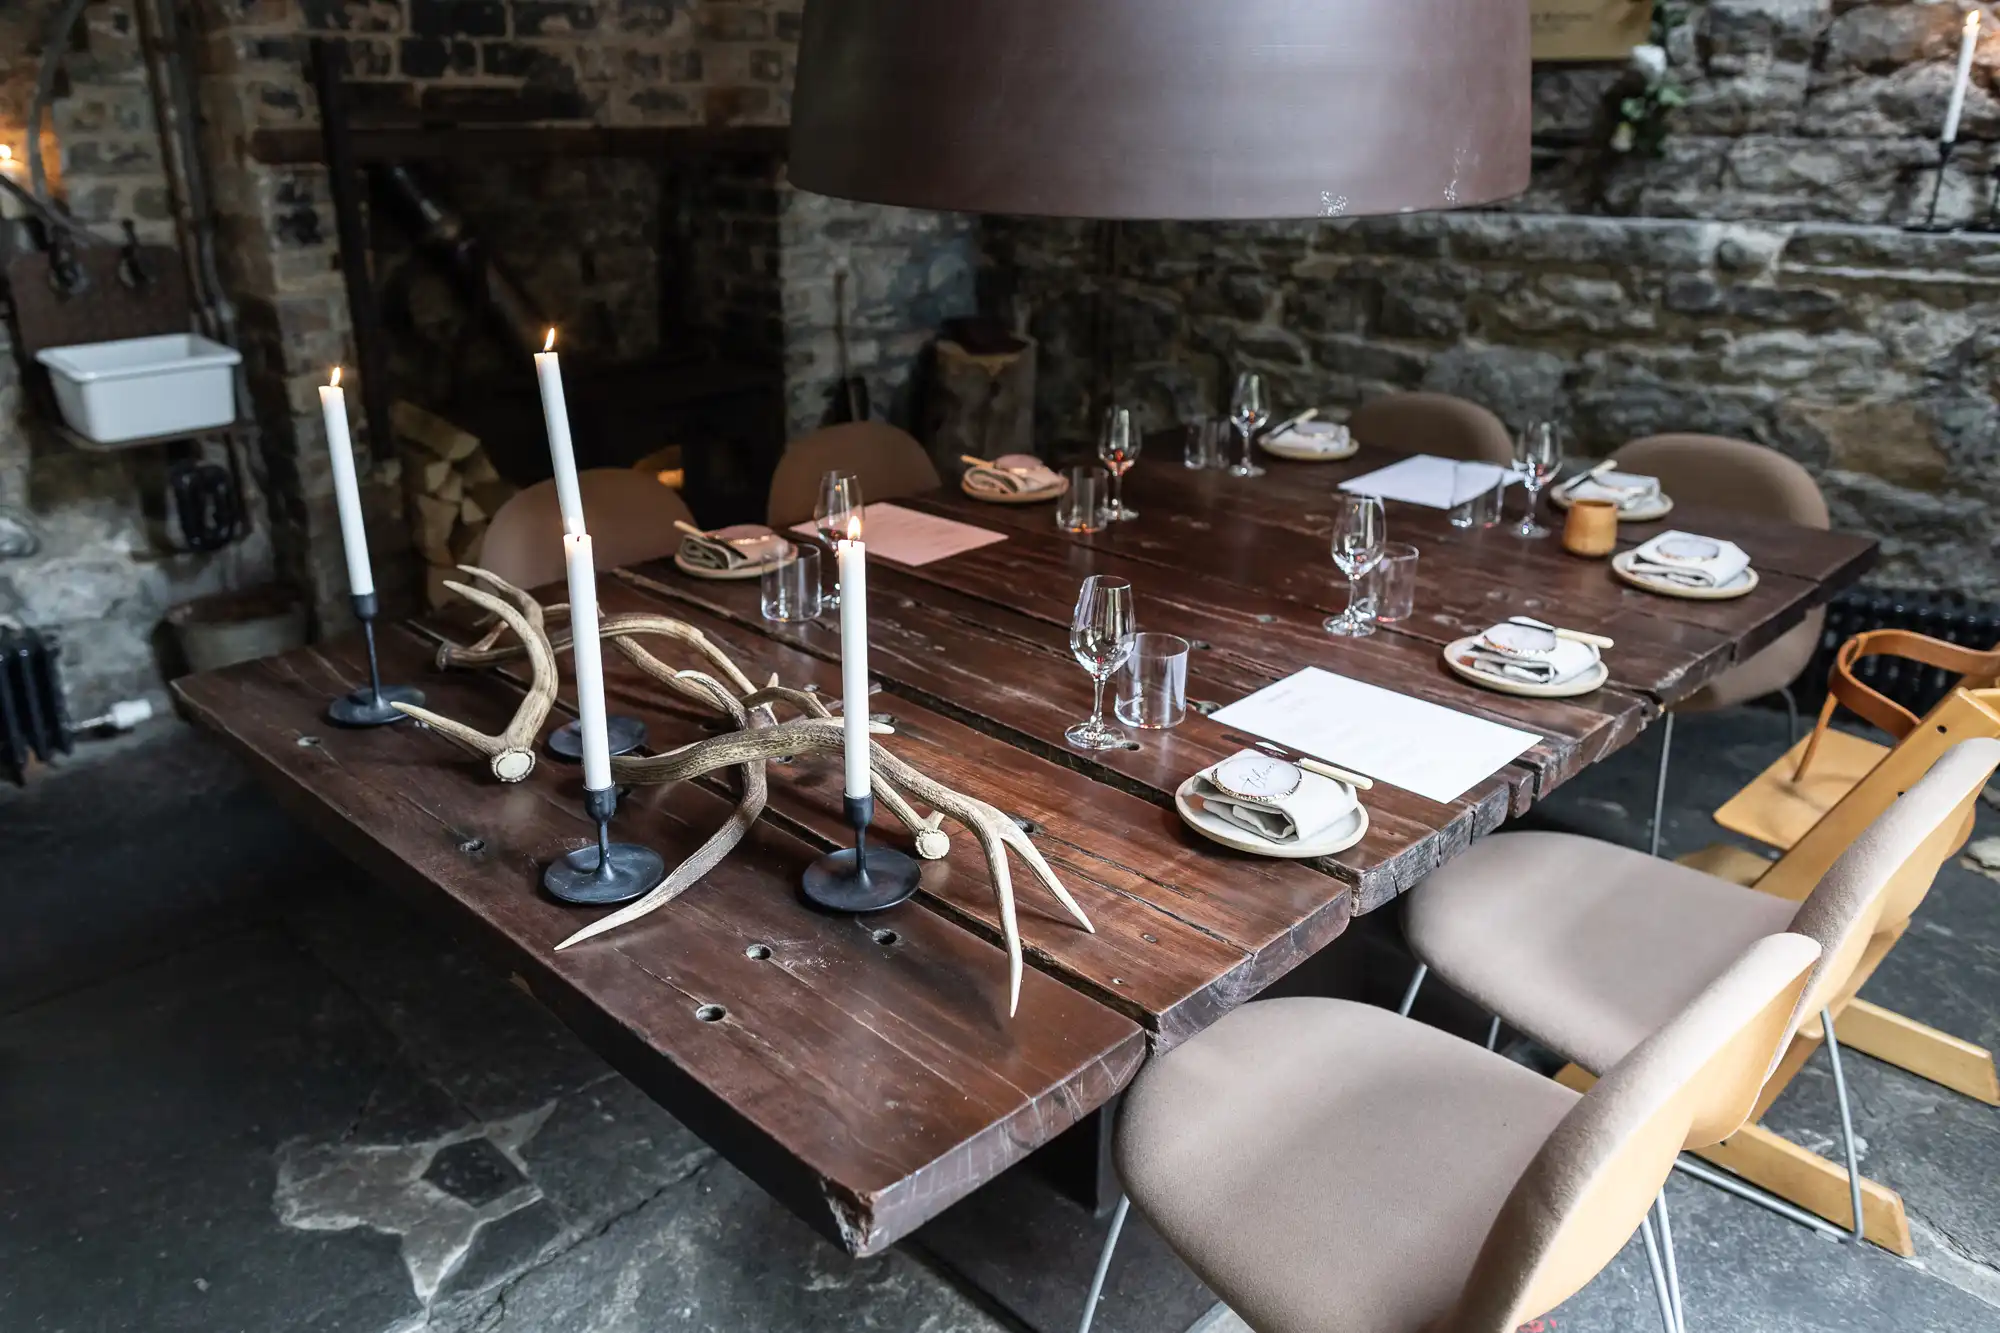 A rustic dining table set for six, with candles, antlers, and simple dinnerware in a stone-walled room.